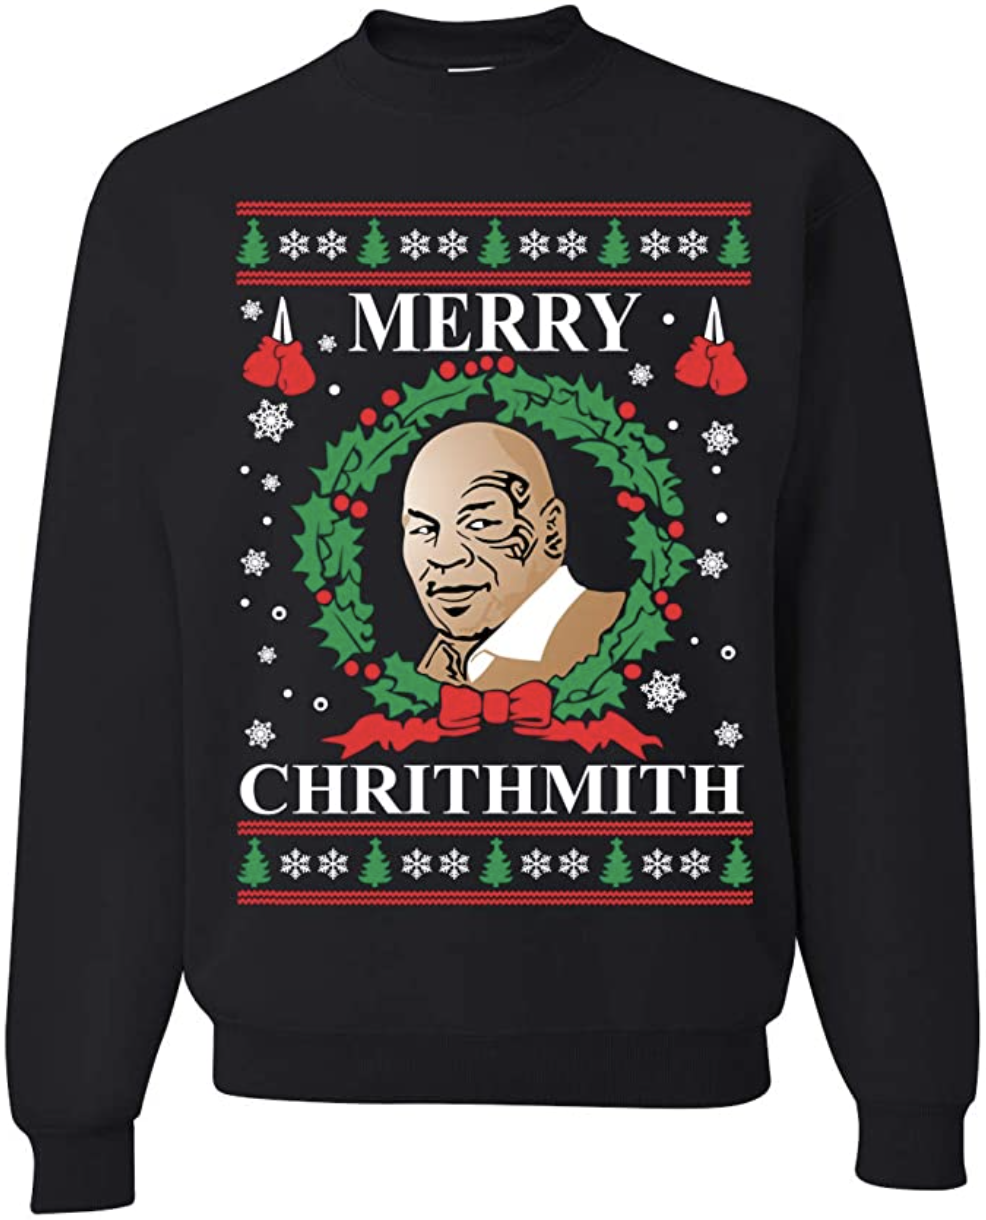 Mike Tyson Christmas sweater